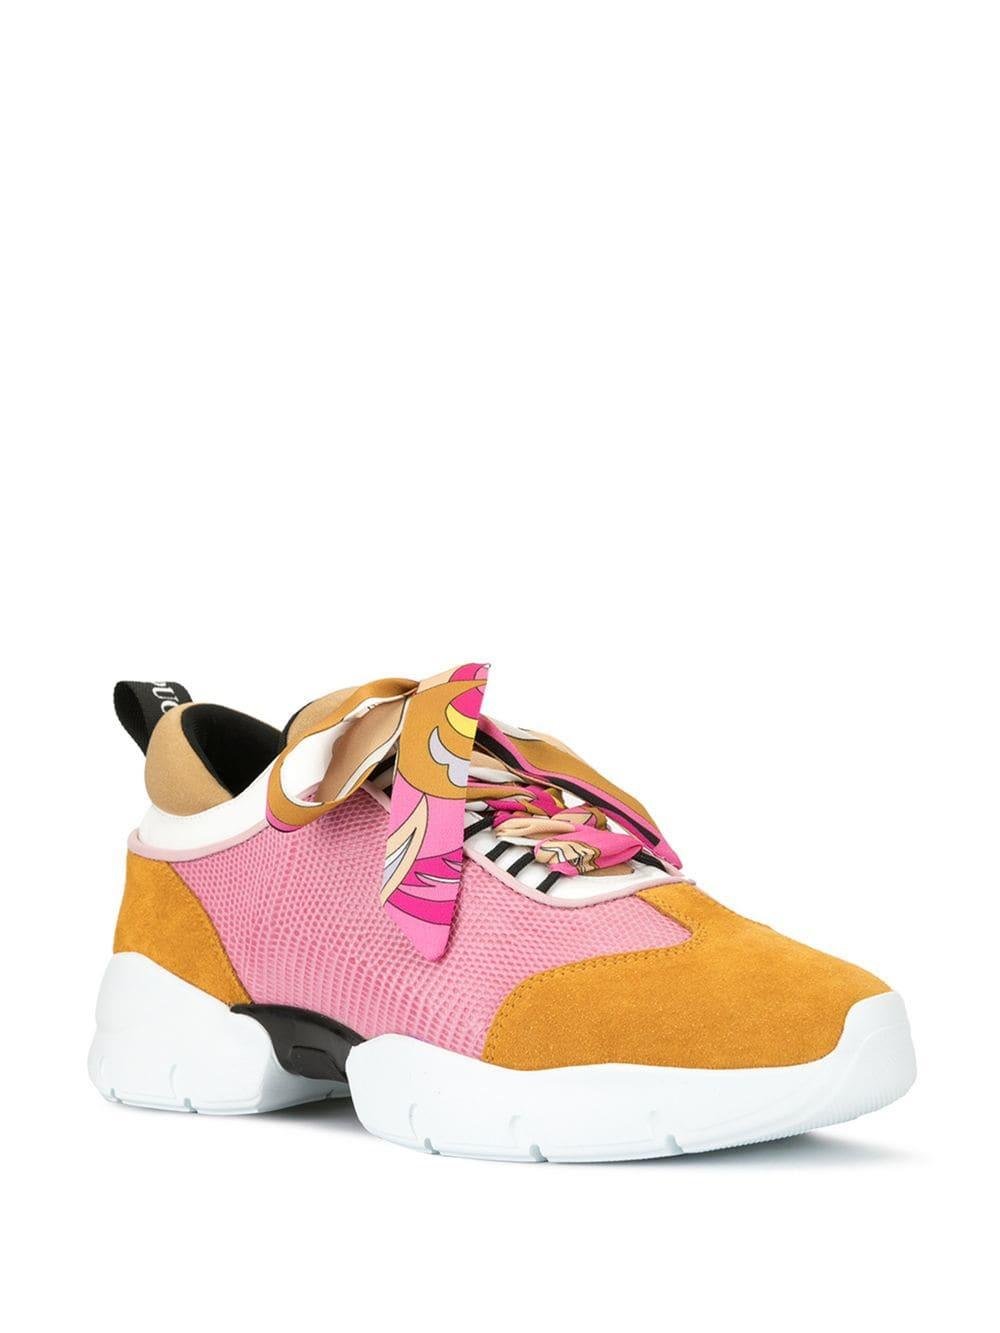 Lyst - Emilio Pucci City Wave Sneakers in Pink